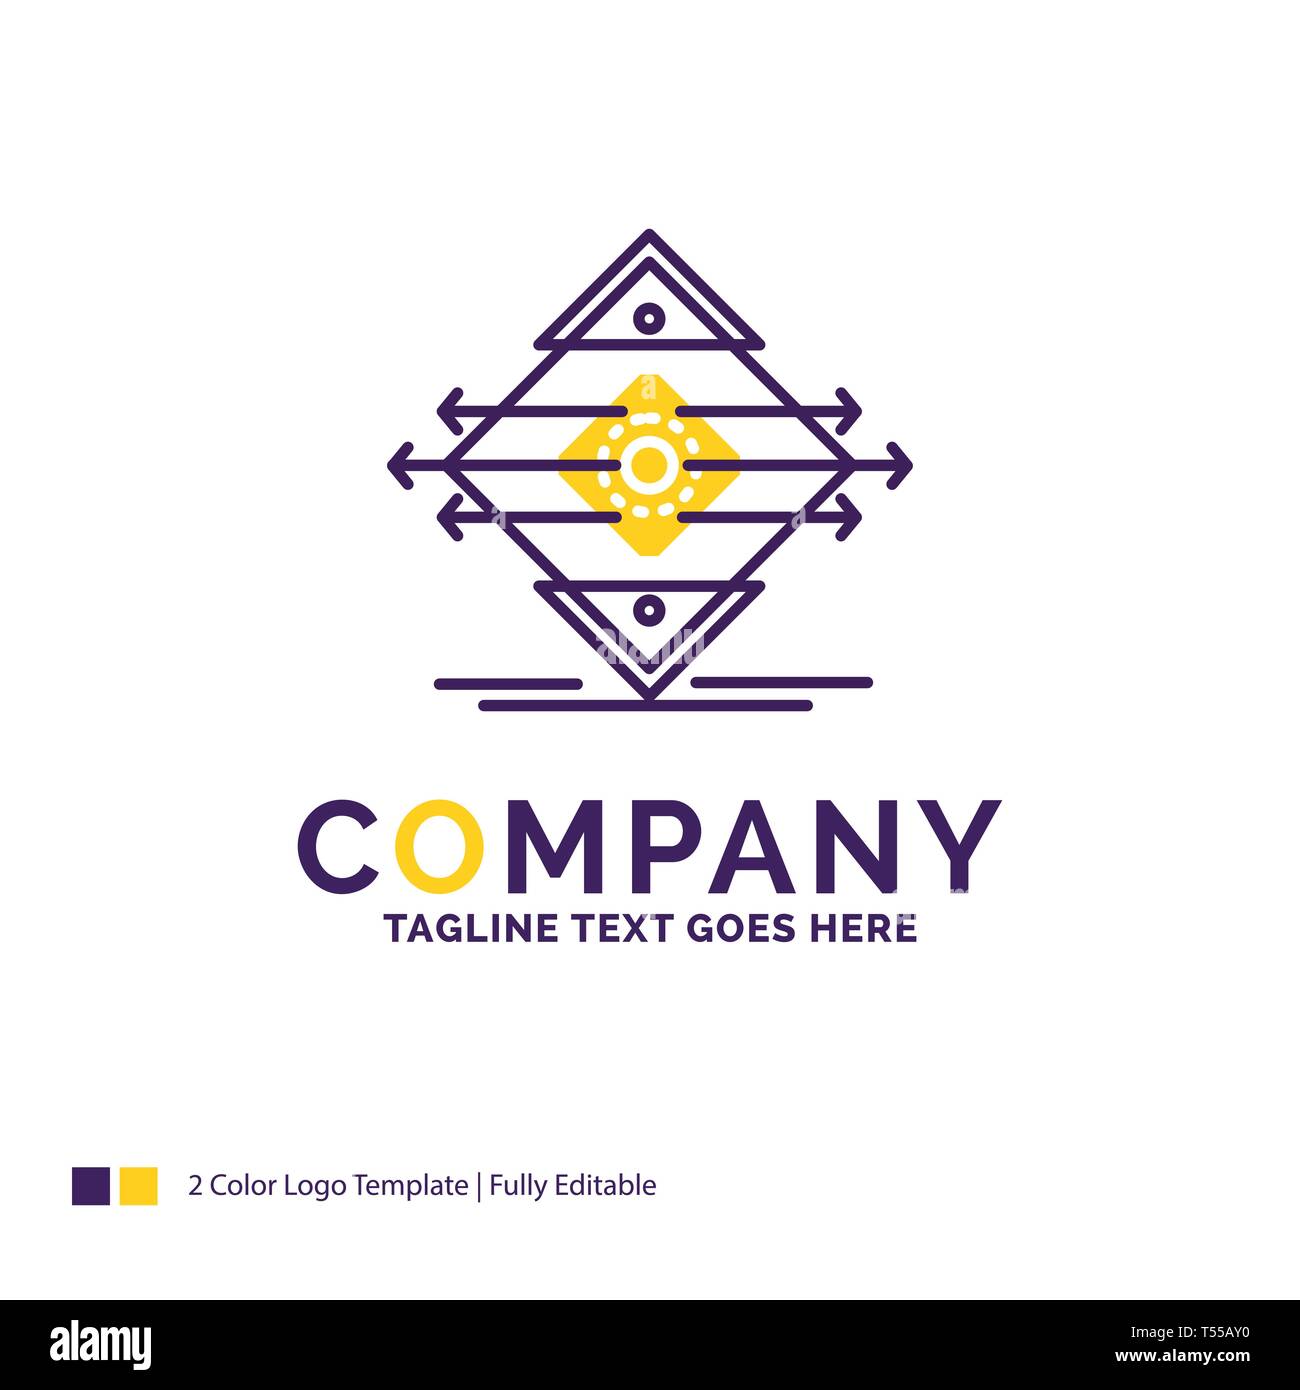 Company Name Logo Design For Traffic Lane Road Sign Safety Purple And Yellow Brand Name Design With Place For Tagline Creative Logo Template For Stock Vector Image Art Alamy